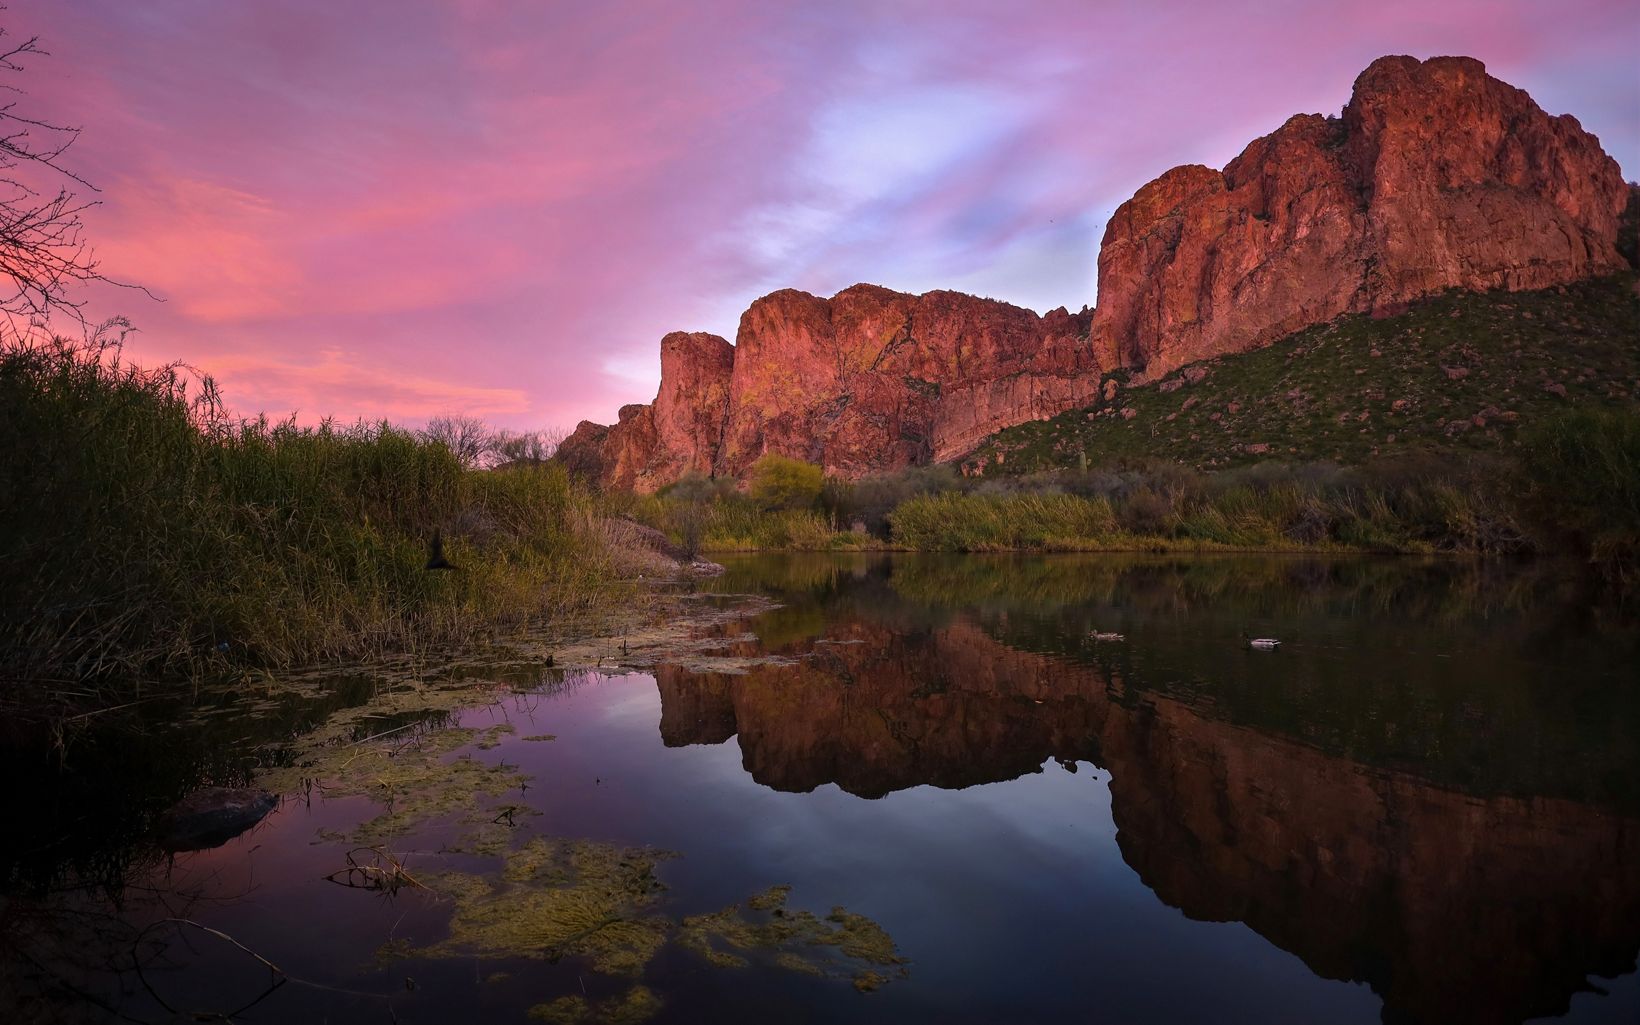 Landscape of a sunset over the Salt River with mountains reflecting on water. 